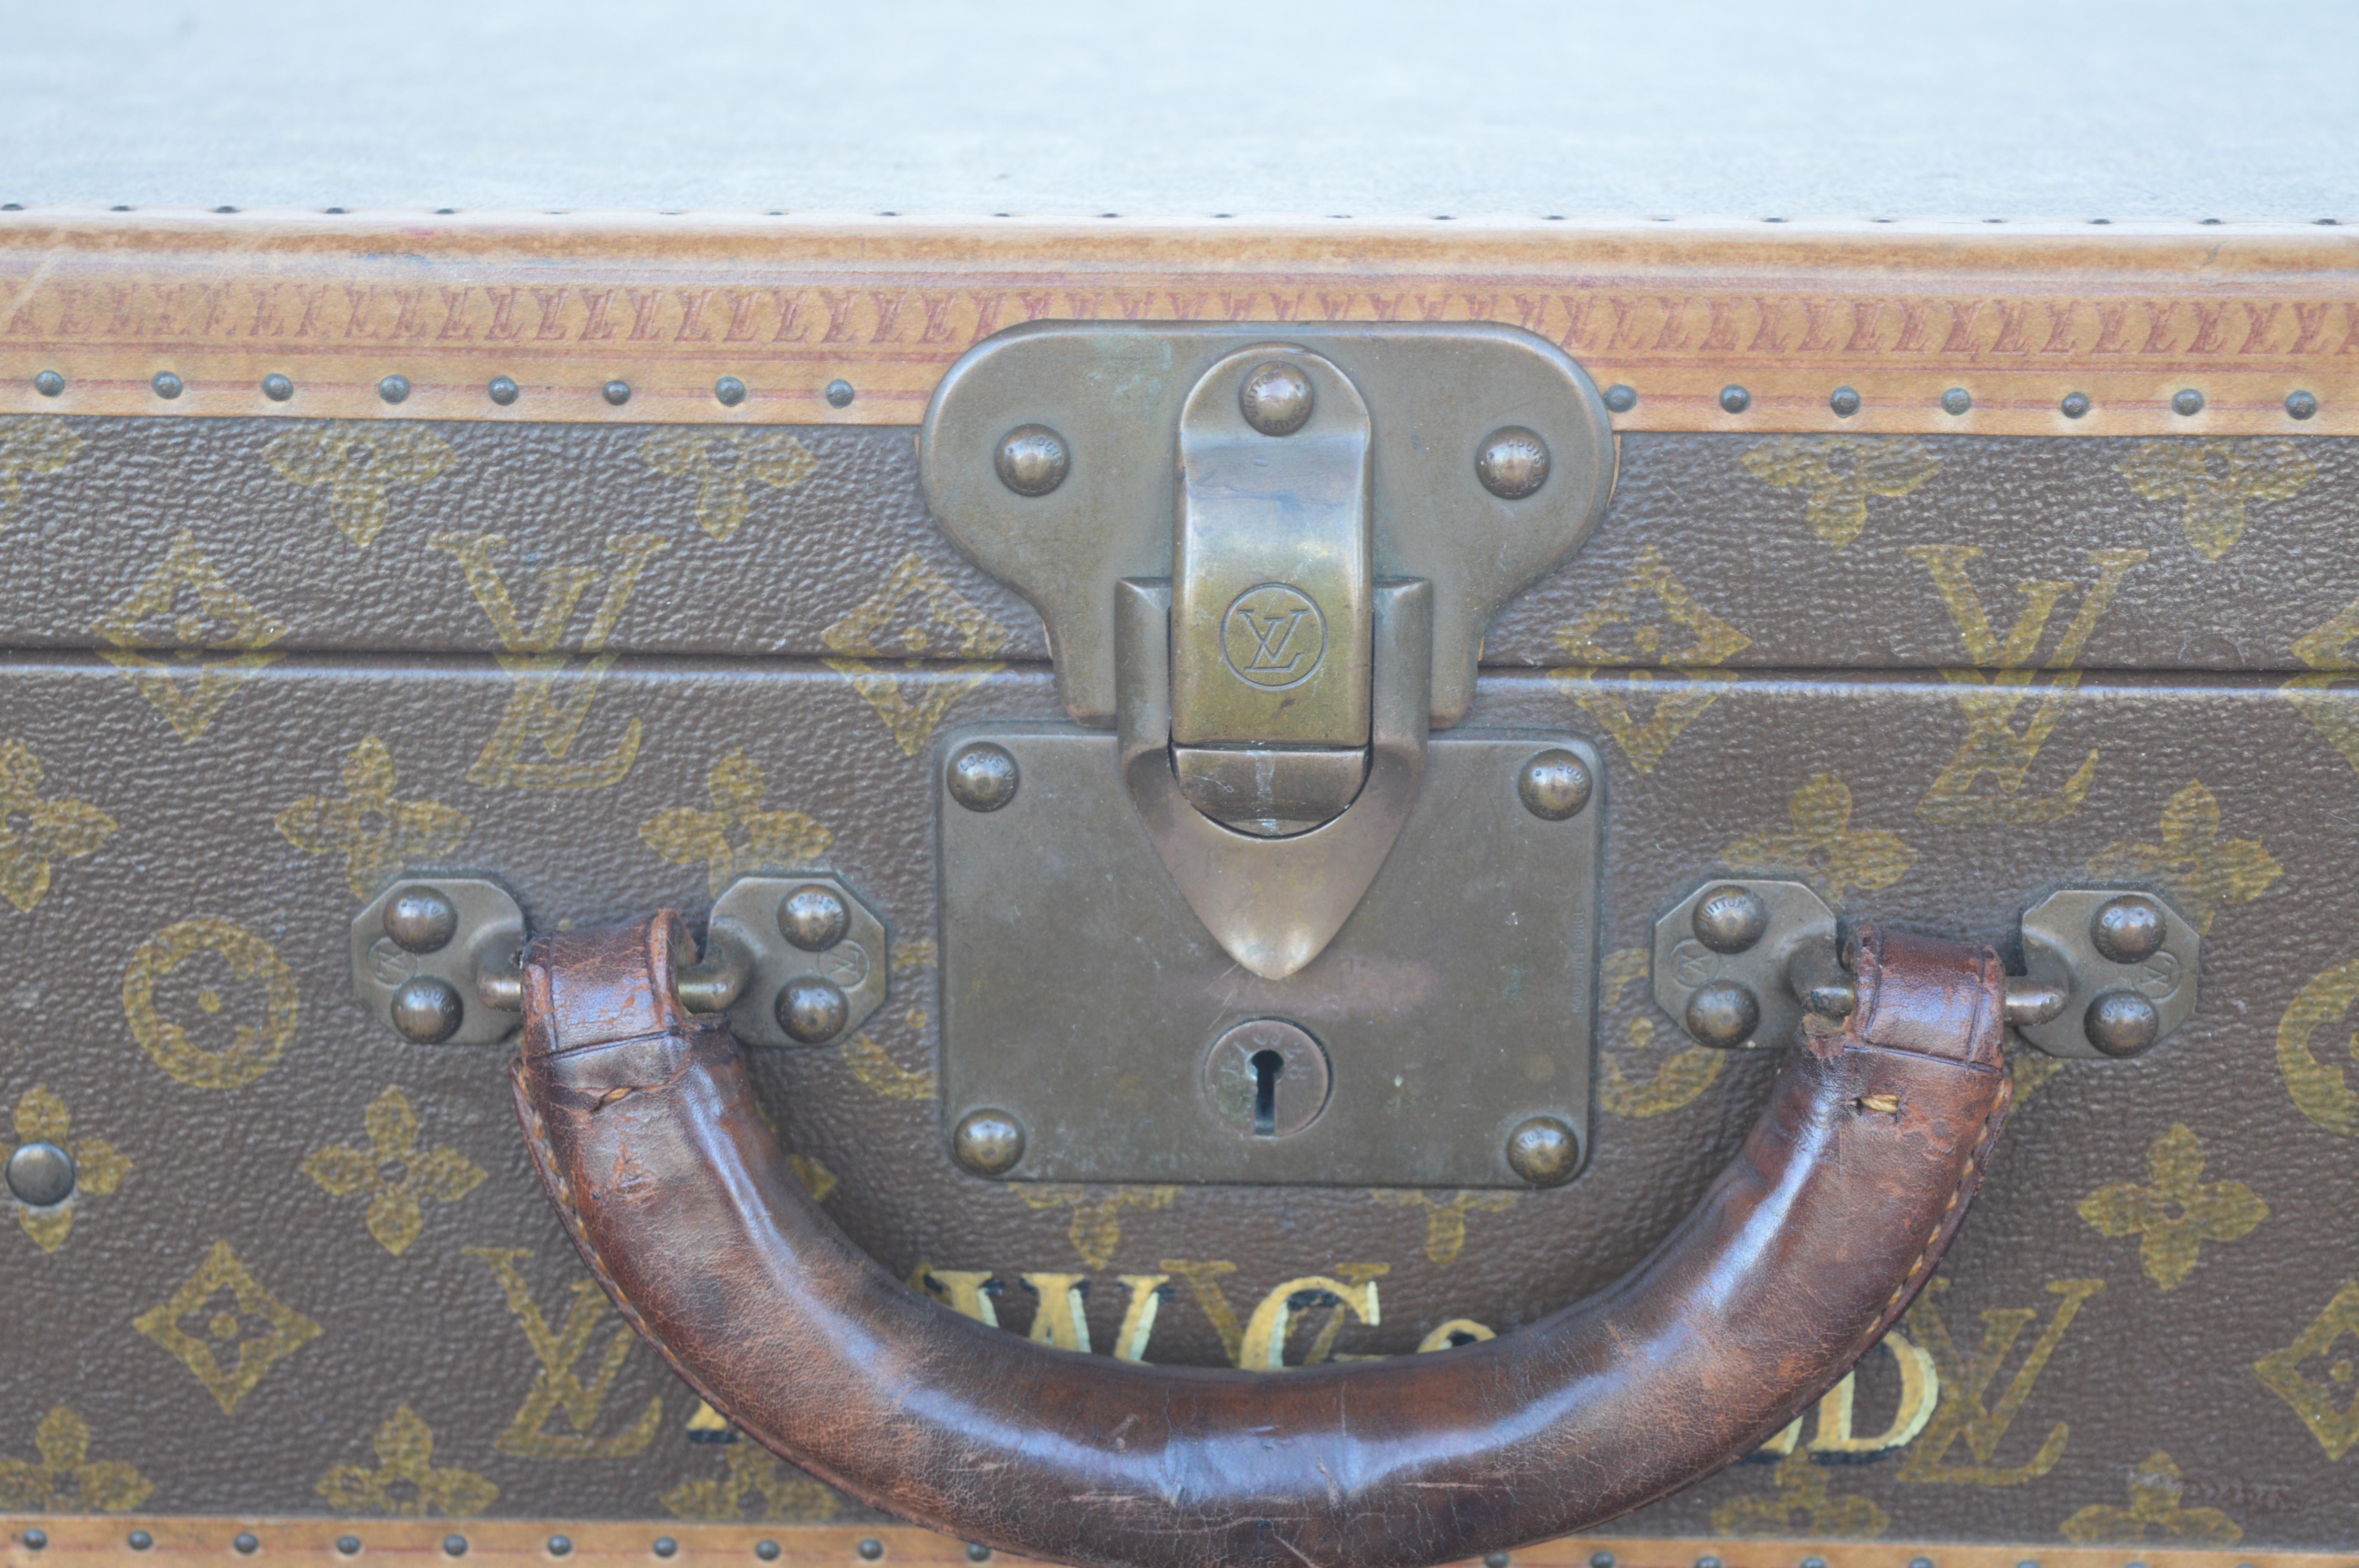 Two Louis Vuitton trunks.
Smaller one measures 14.5 inches H x 23.5 inches W x 7 inches D.